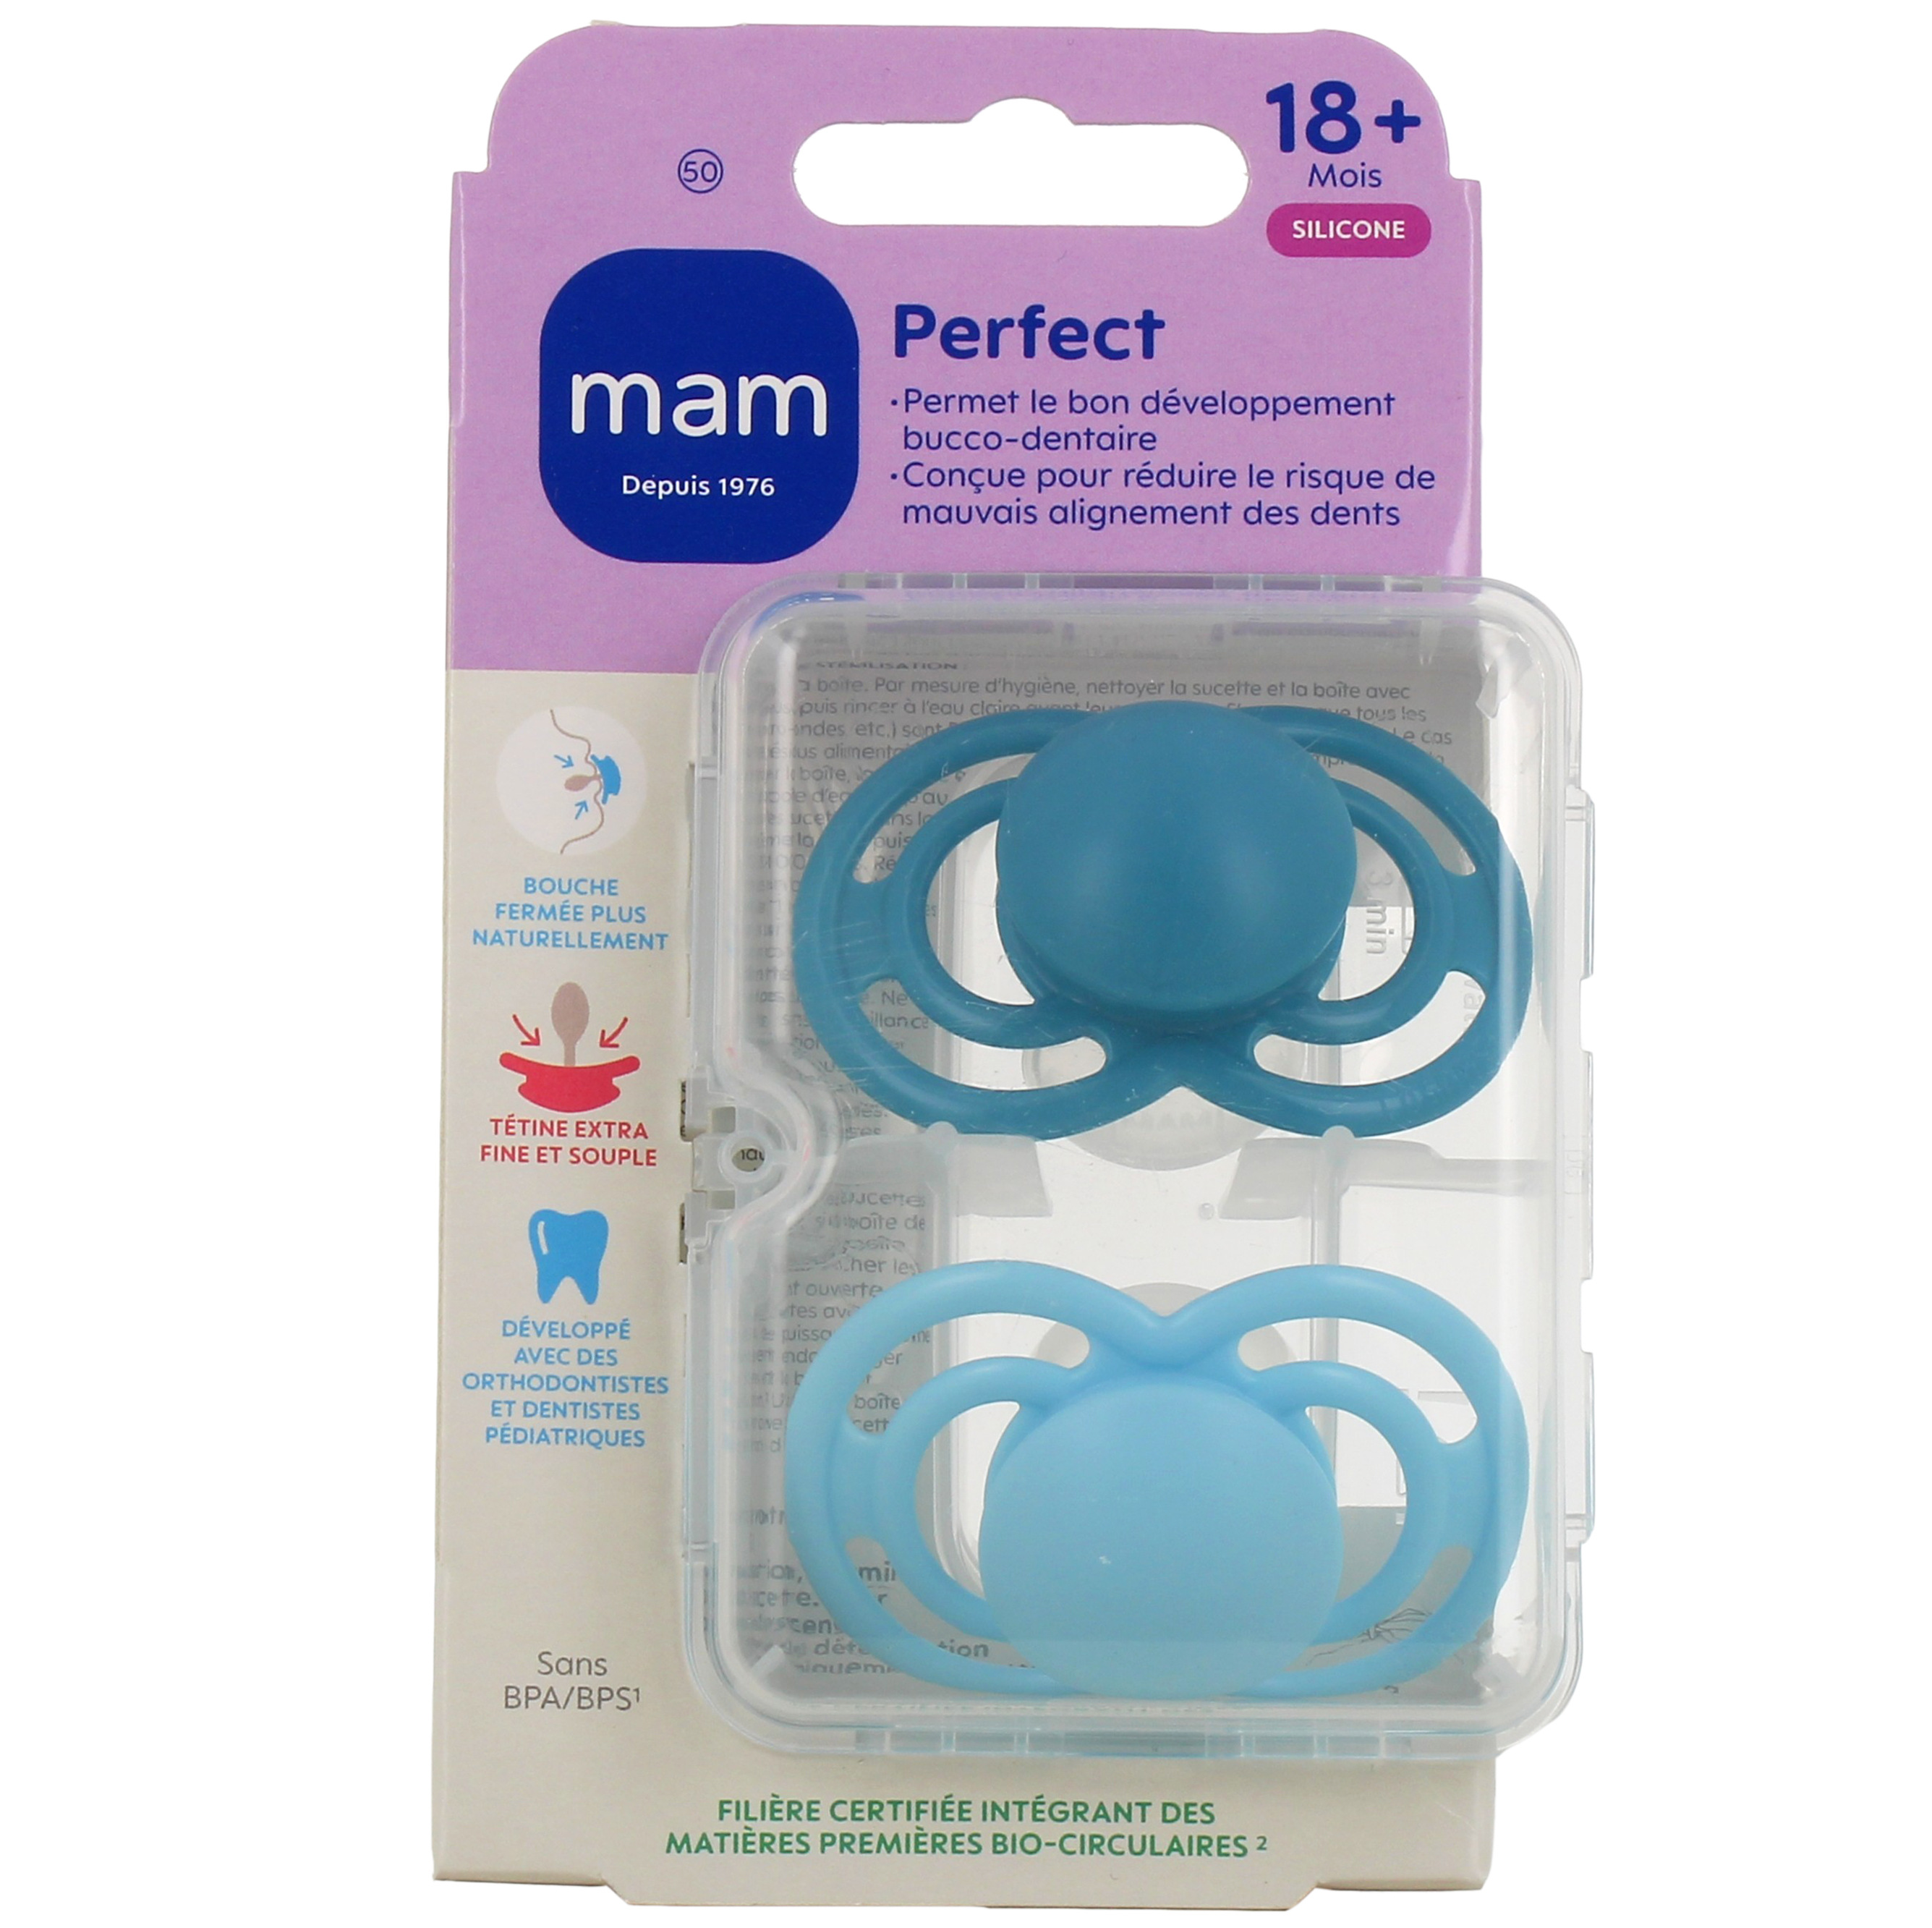 https://cdn.pharmaciedesdrakkars.com/media/images/products/mam-perfect-sucette-silicone-18-mois-mam5-1705915582.jpg